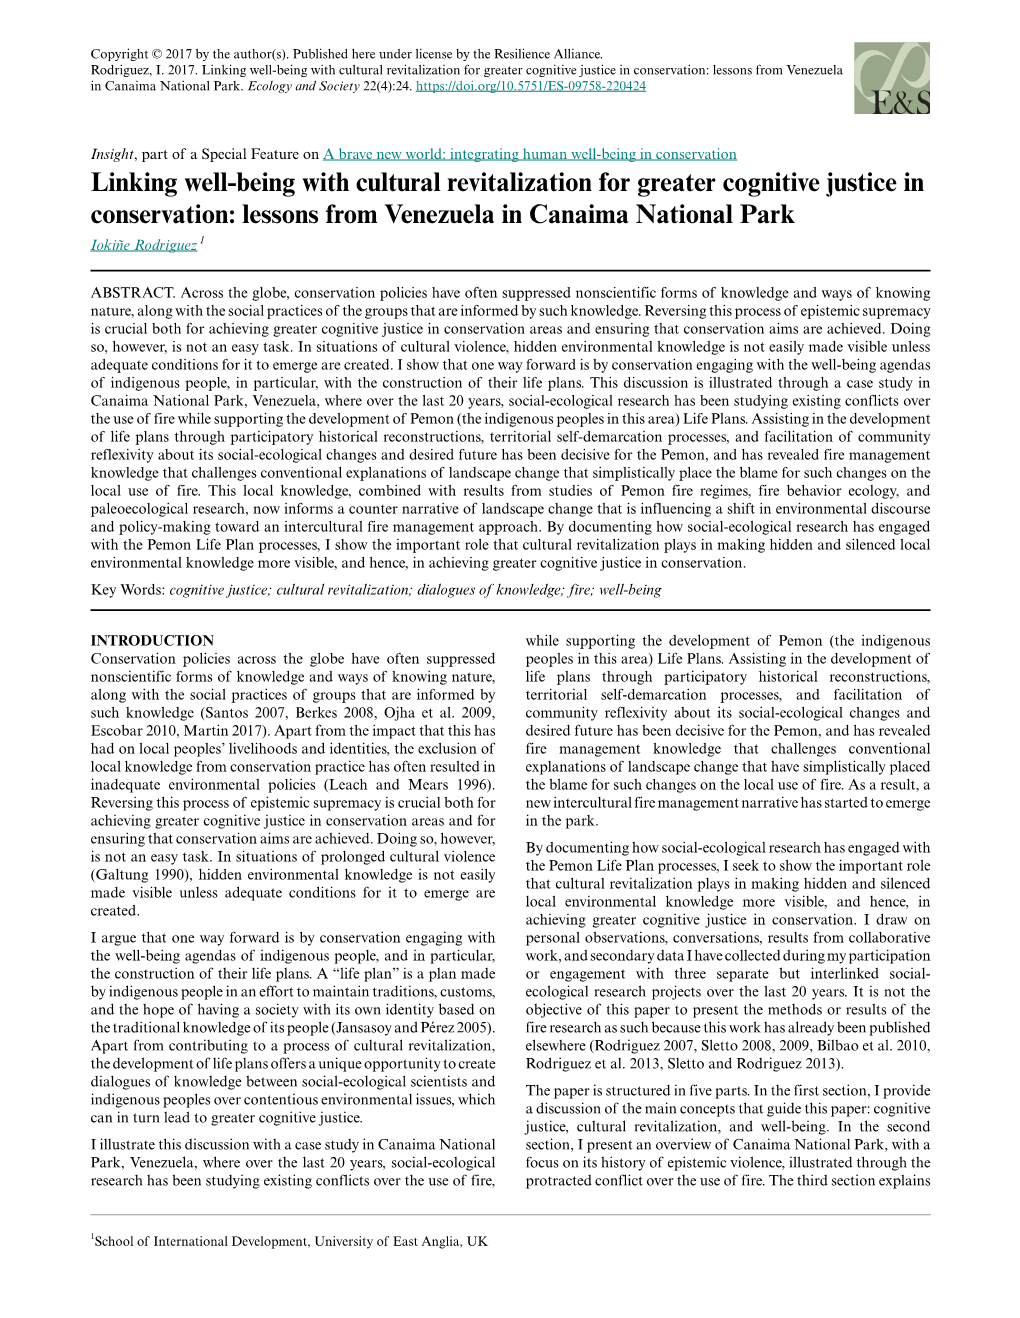 Linking Well-Being with Cultural Revitalization for Greater Cognitive Justice in Conservation: Lessons from Venezuela in Canaima National Park